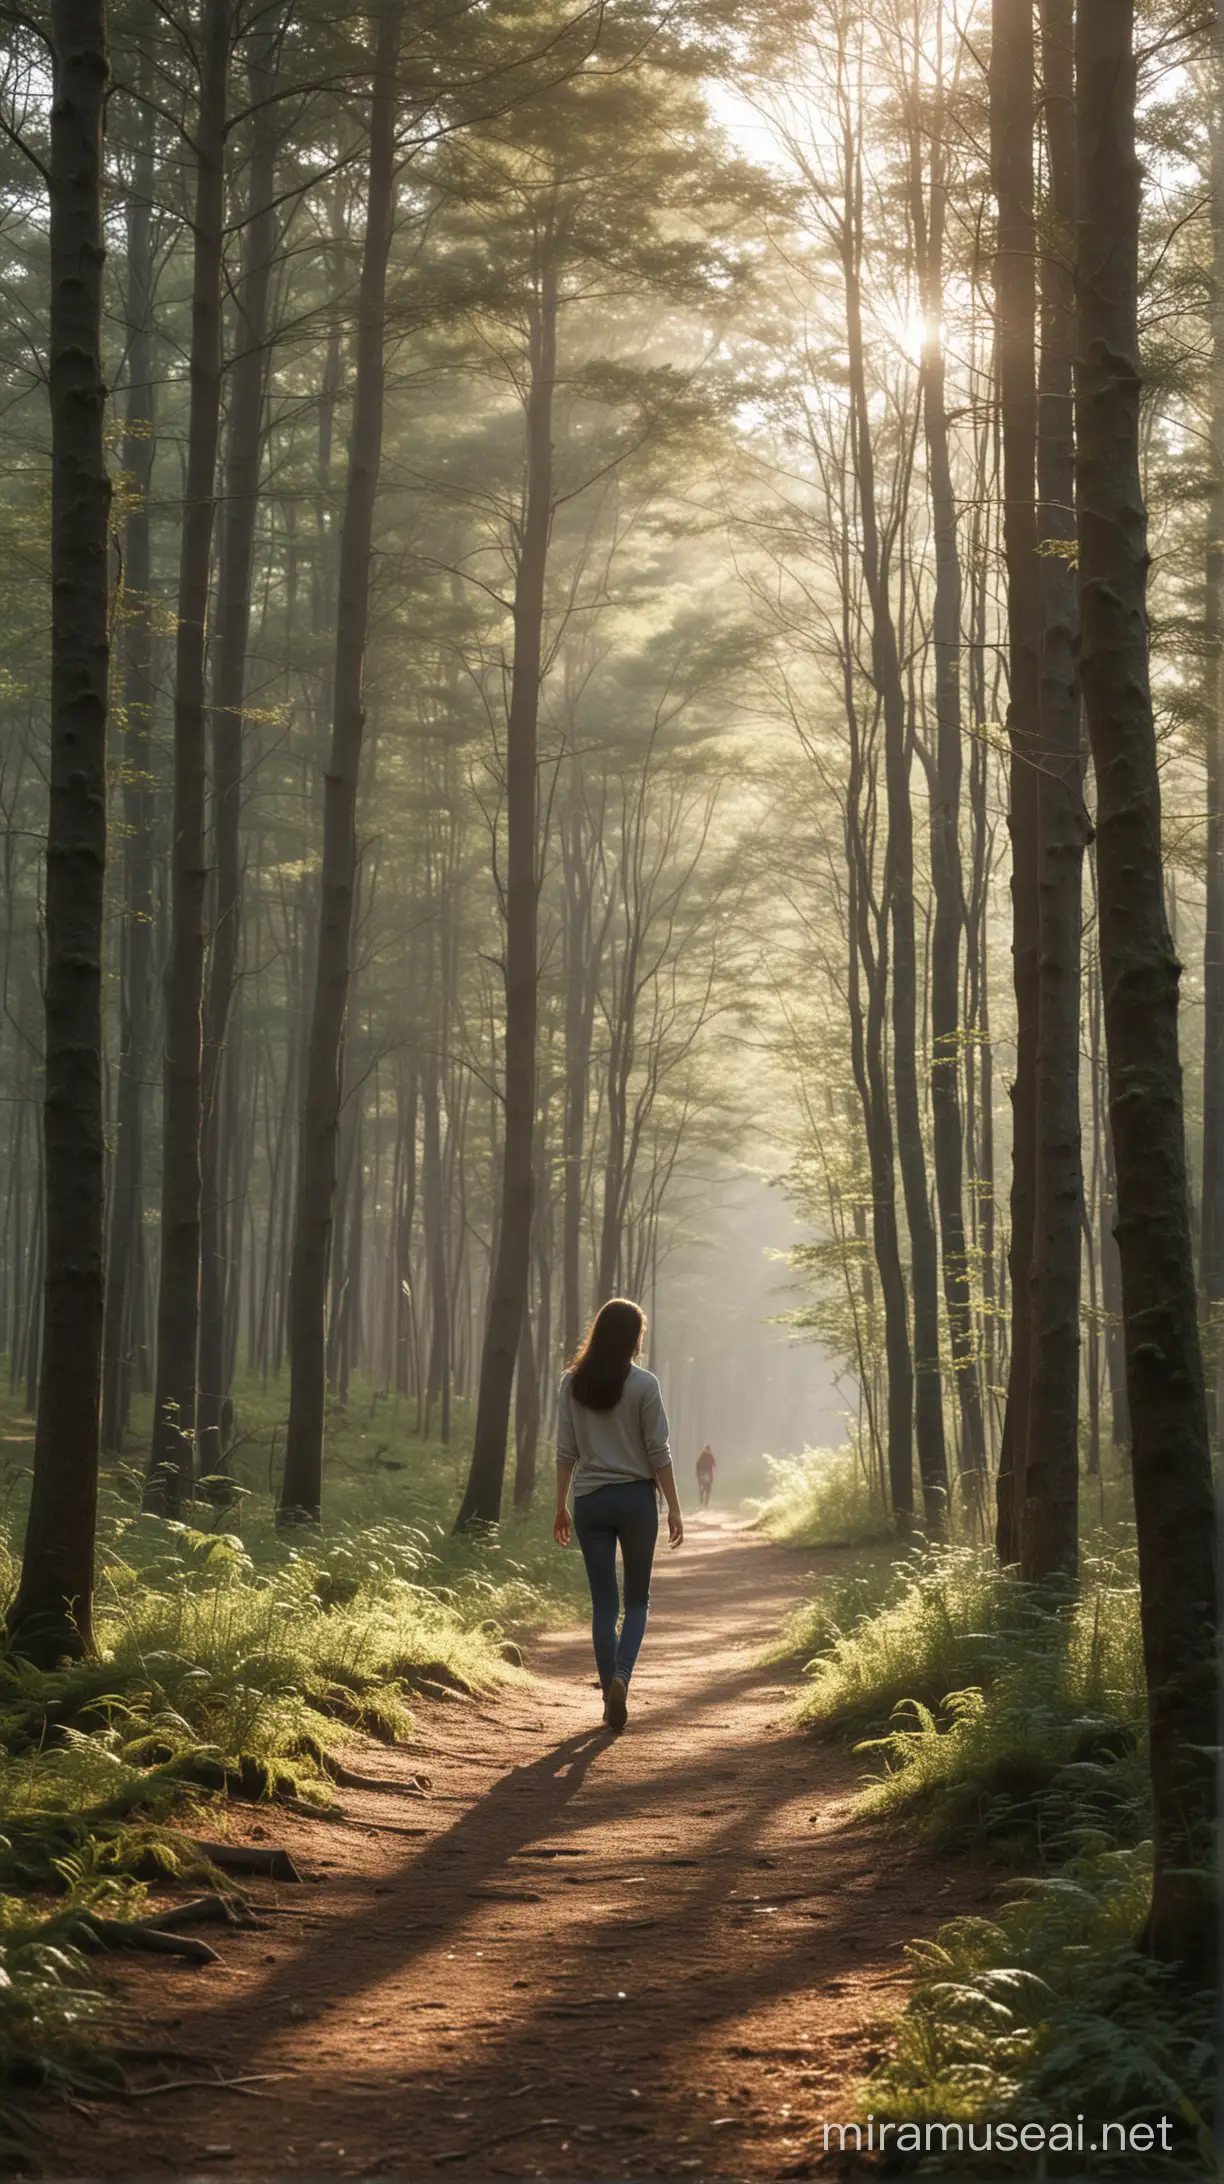 A young woman walking through a forest clearing, embodying tranquility and composure. The scene captures her in a peaceful, natural setting with soft light filtering through the trees, creating a calm and serene atmosphere. She is alone, yet appears content and at ease, harmonizing with the quiet beauty of the forest around her.